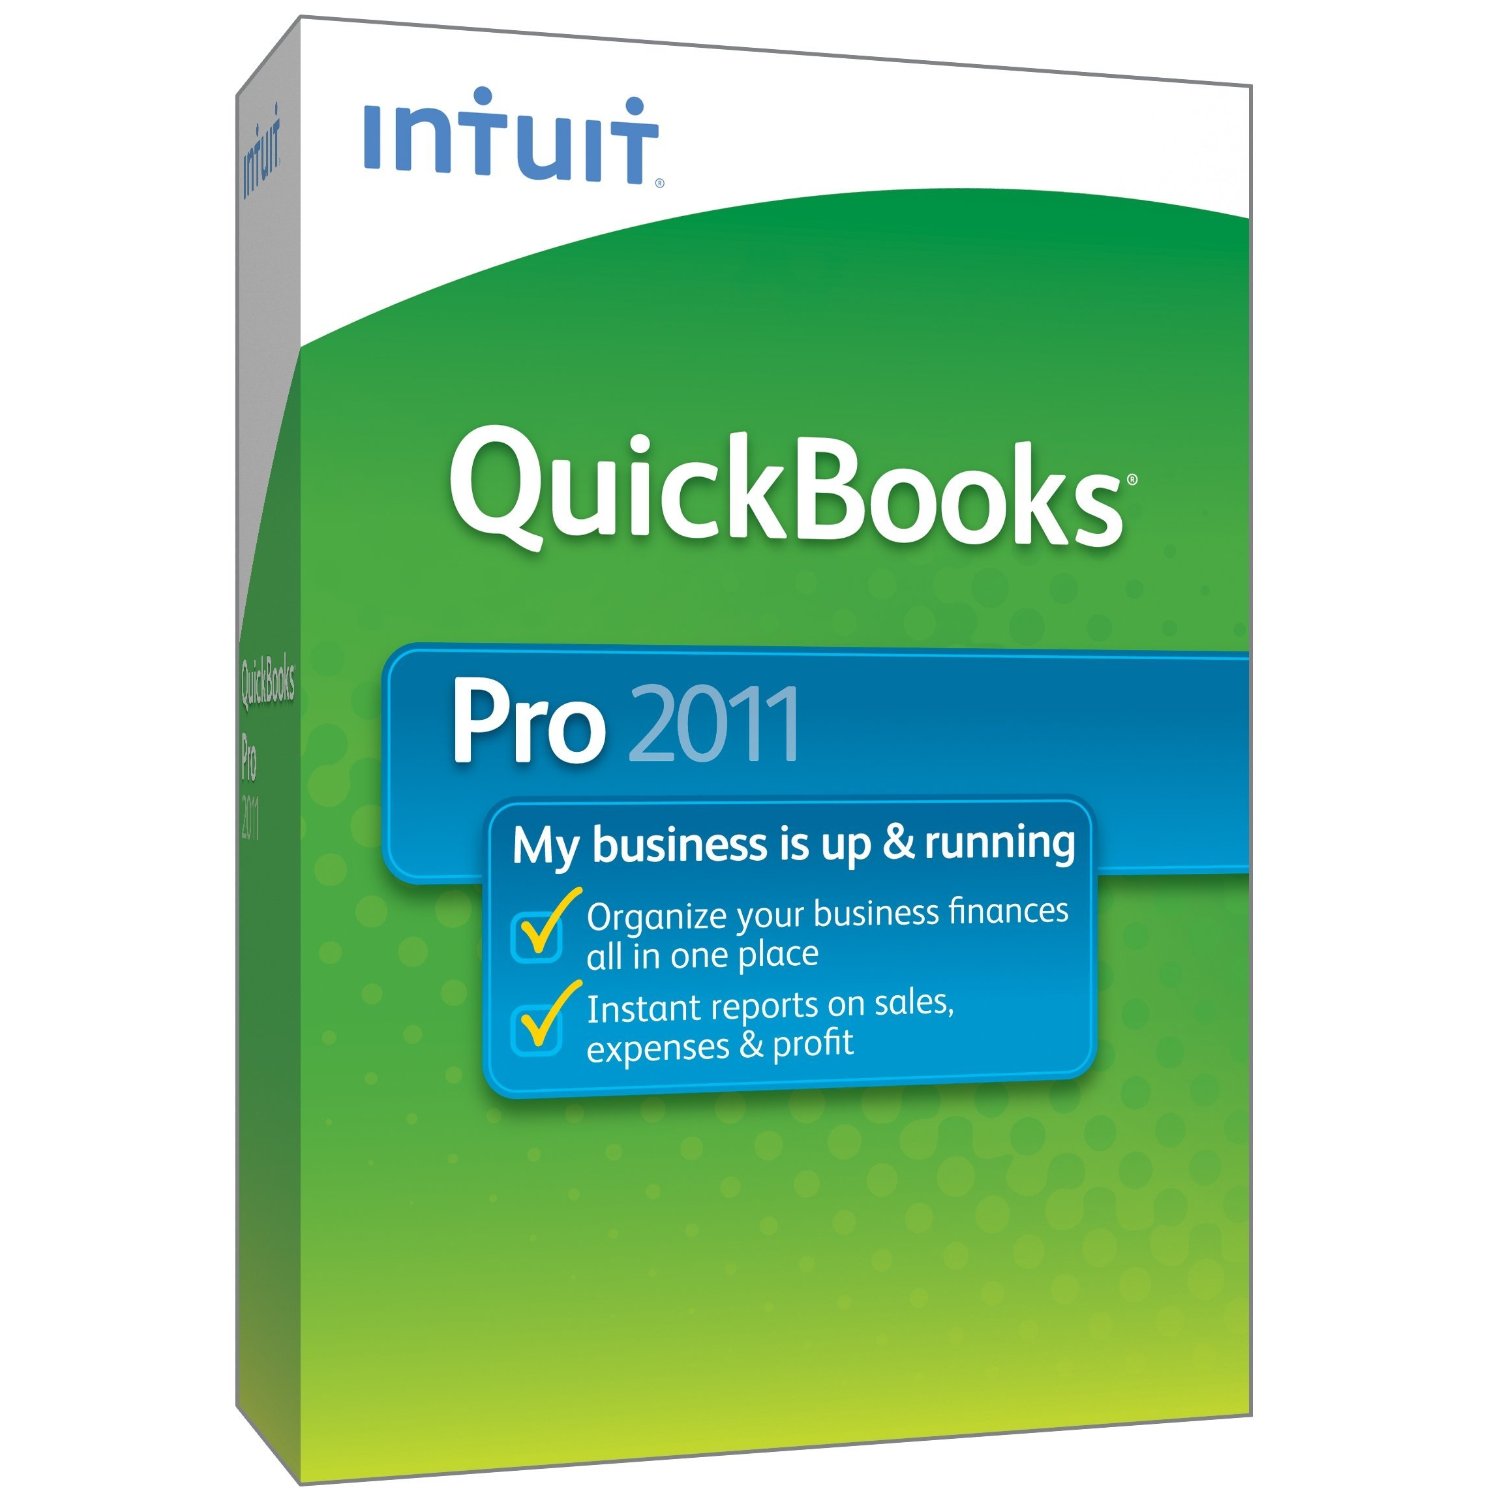 http://thetechjournal.com/wp-content/uploads/images/1108/1313993243-quickbooks-pro-2011--software-review-1.jpg